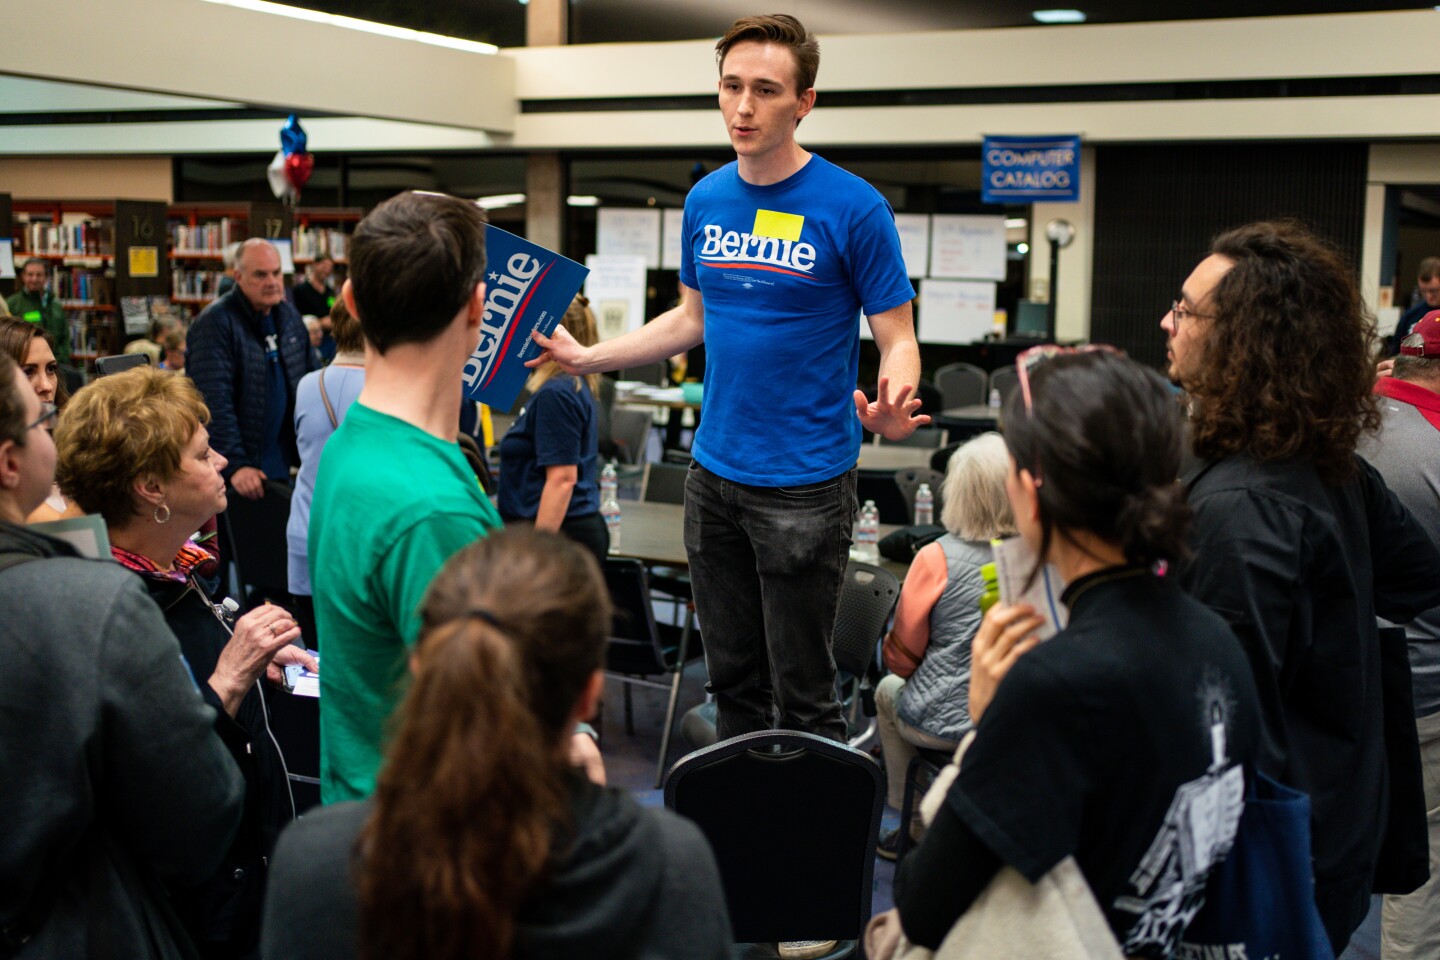 PALM SPRINGS, CALIF. - FEBRUARY 03: Trevor McMahan of Orange City, IA addresses Bernie Sanders and Elizabeth Warren supporting Iowan caucusgoers during a satellite caucus at the Palm Springs Public Library on Monday, Feb. 3, 2020 in Palm Springs, Calif. (Kent Nishimura / Los Angeles Times)